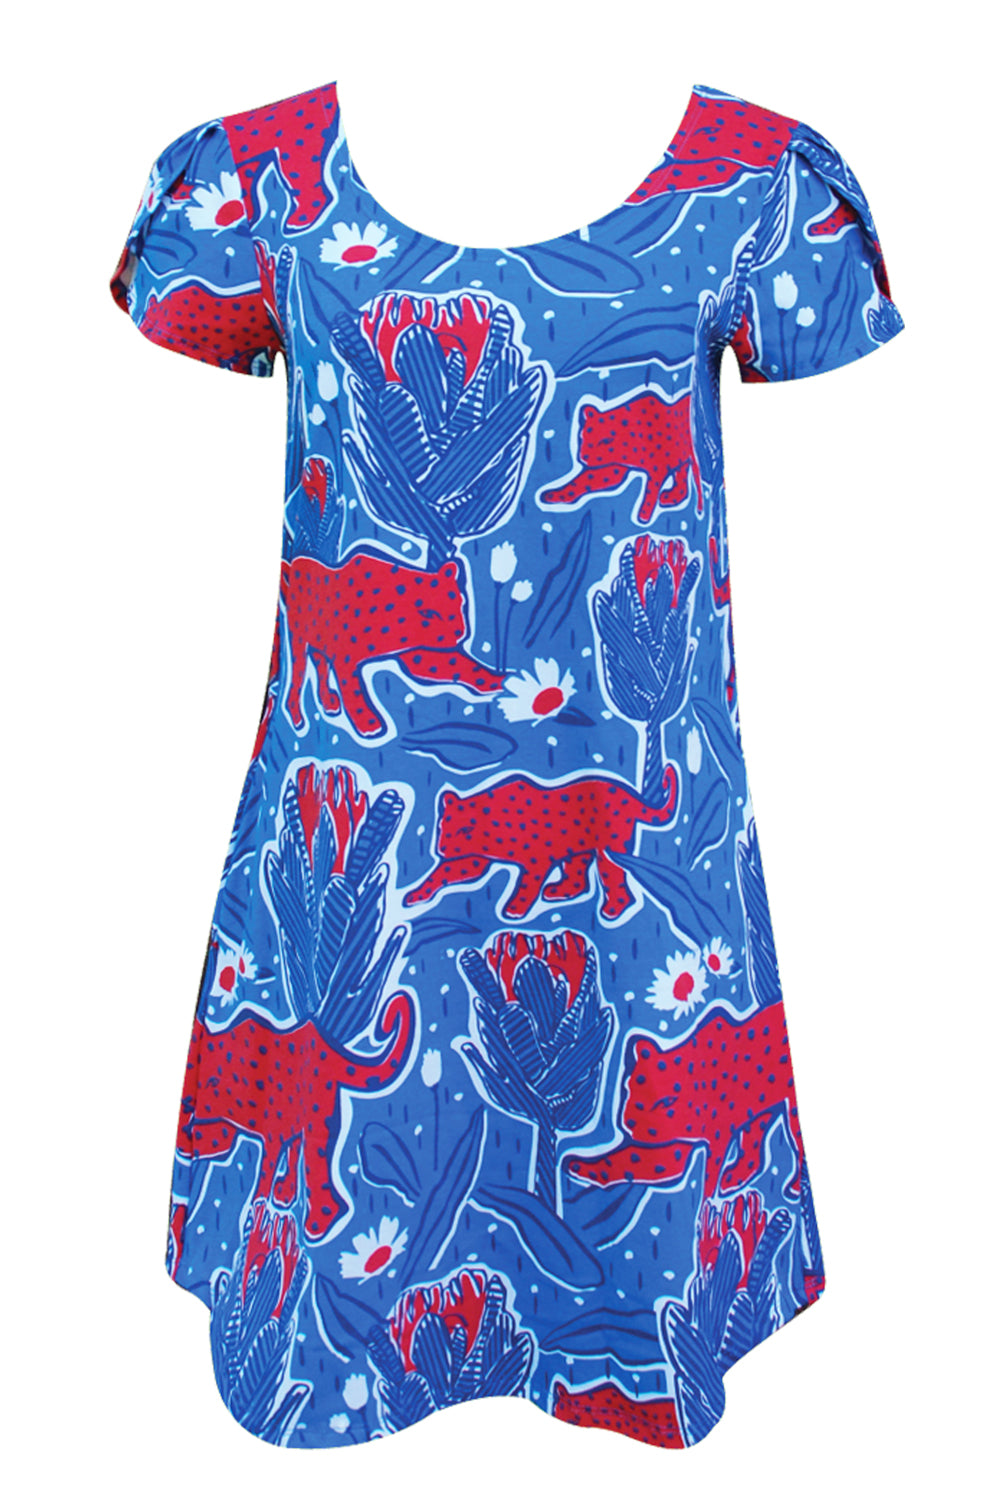 Bright blue and red tulip-sleeved tunic with print of jaguars and protea flowers